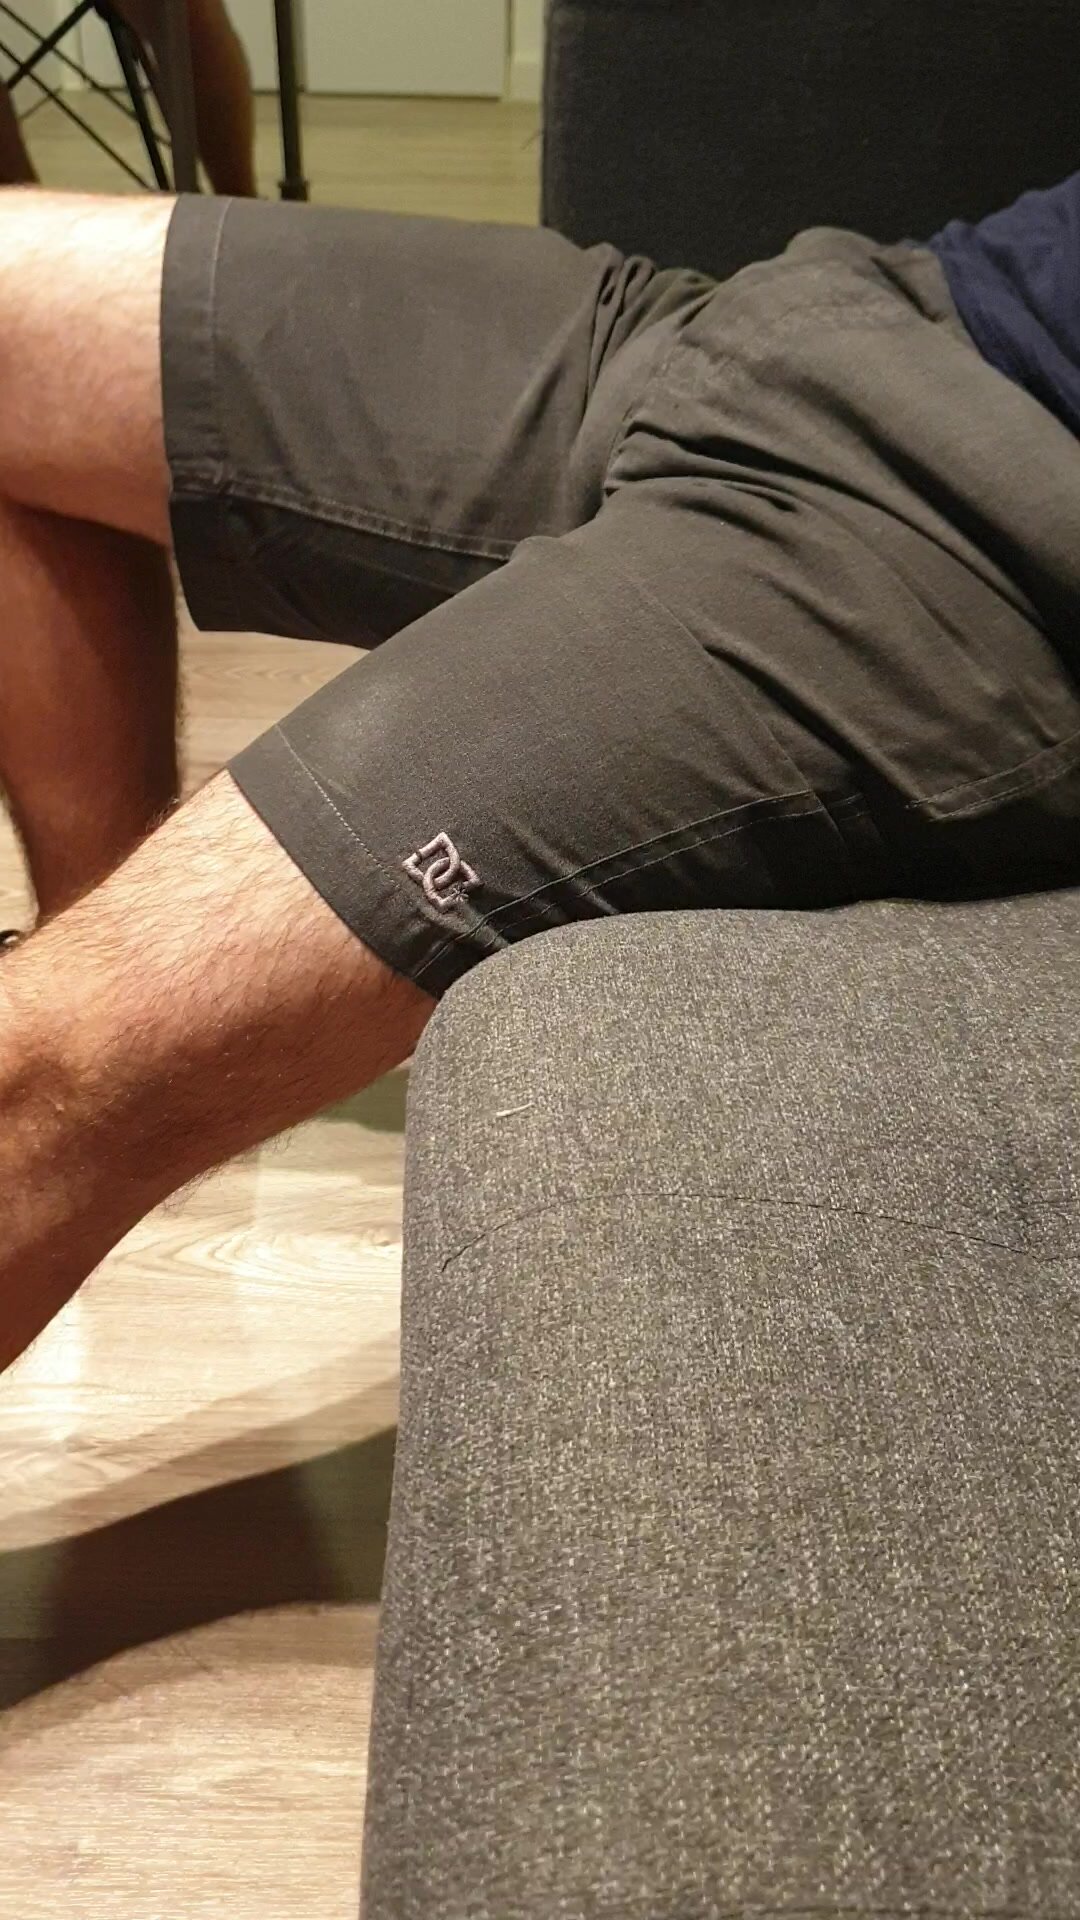 Spying the amazing bulge of my straight friend